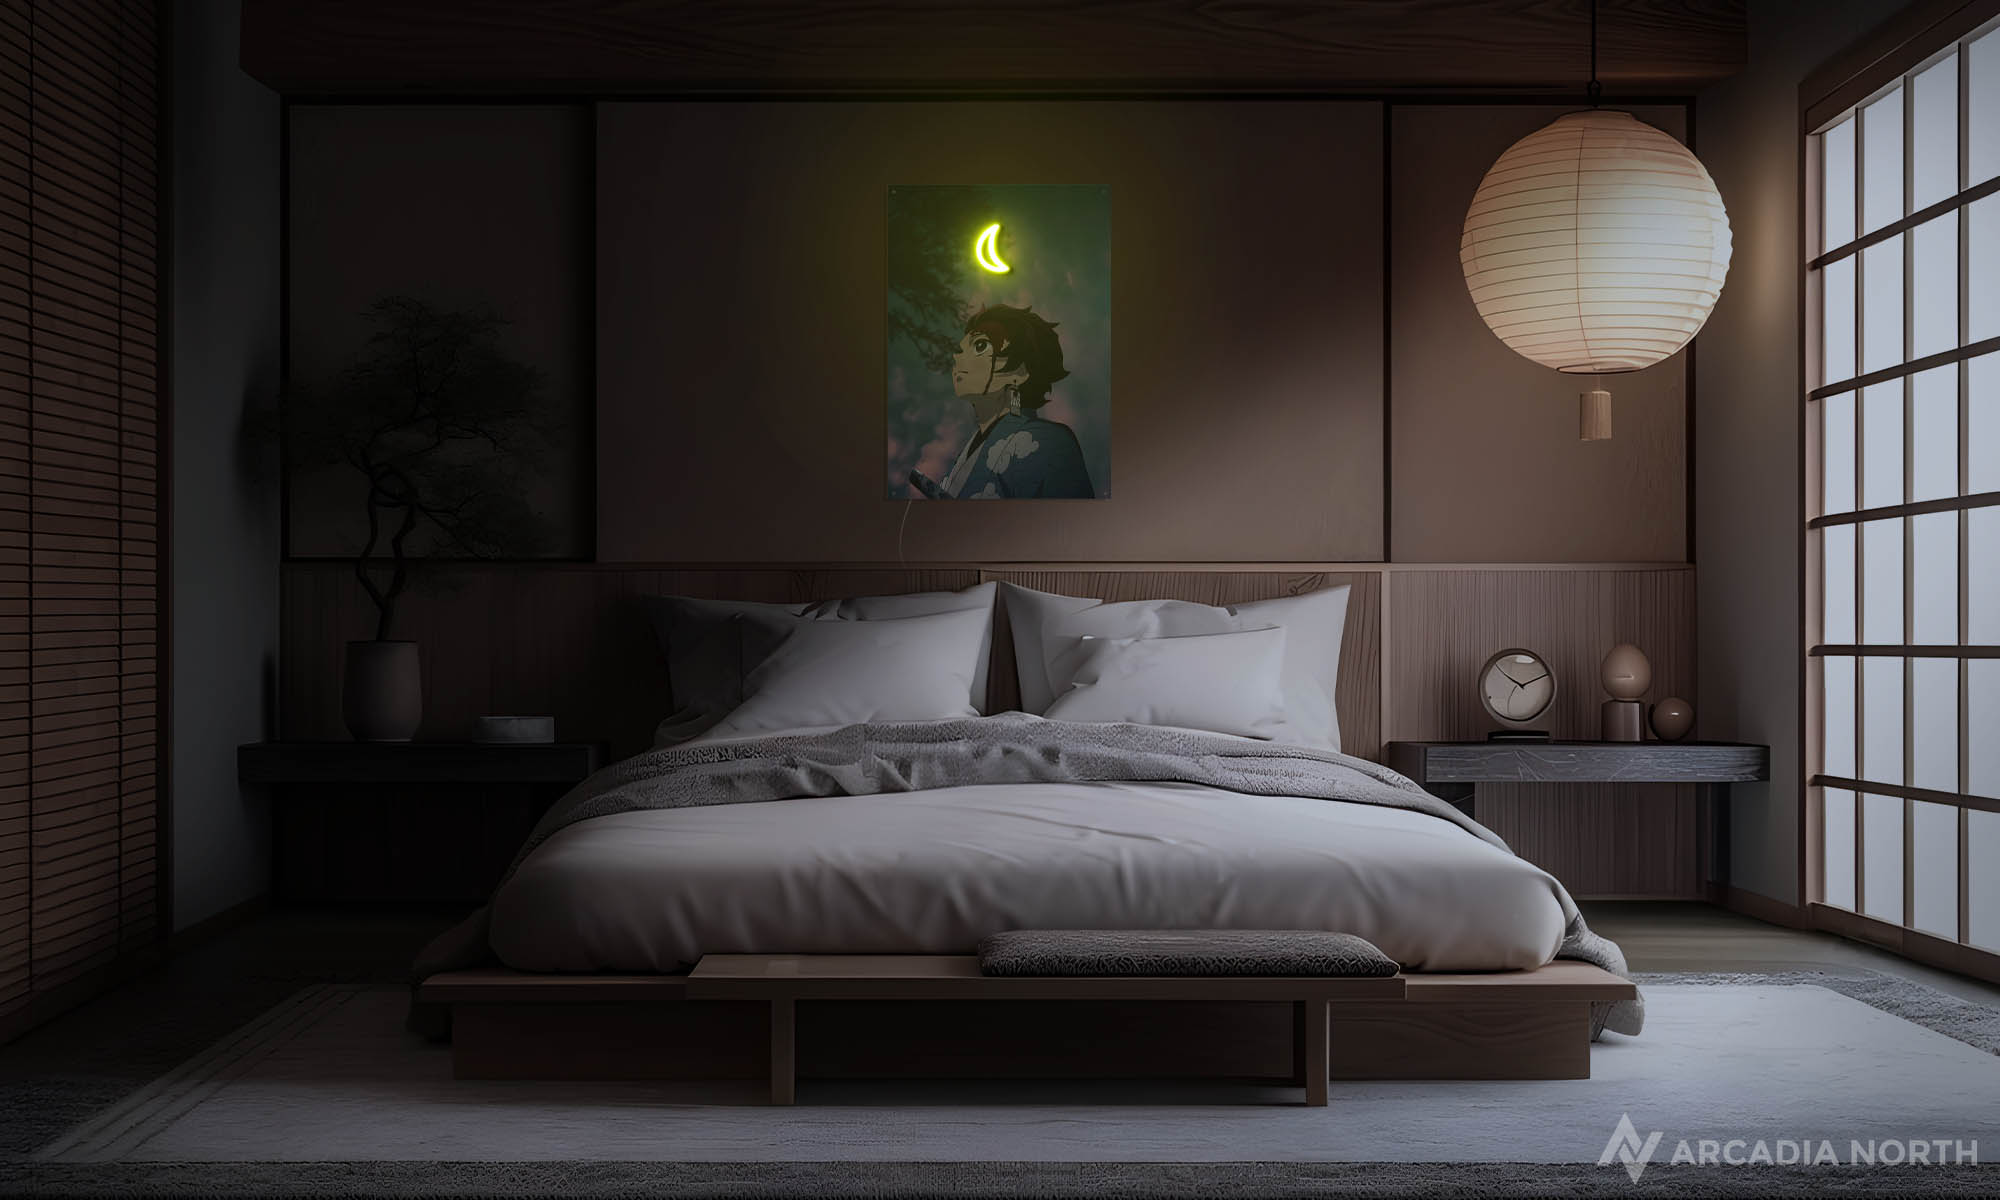 Modern Japanese bedroom with a Demon Slayer/Kimetsu no Yaiba anime poster on the wall depicting Tanjiro Kamado in front of a crescent moon glowing with neon light - UV printed on acrylic - an Arcadia North Original LED Poster